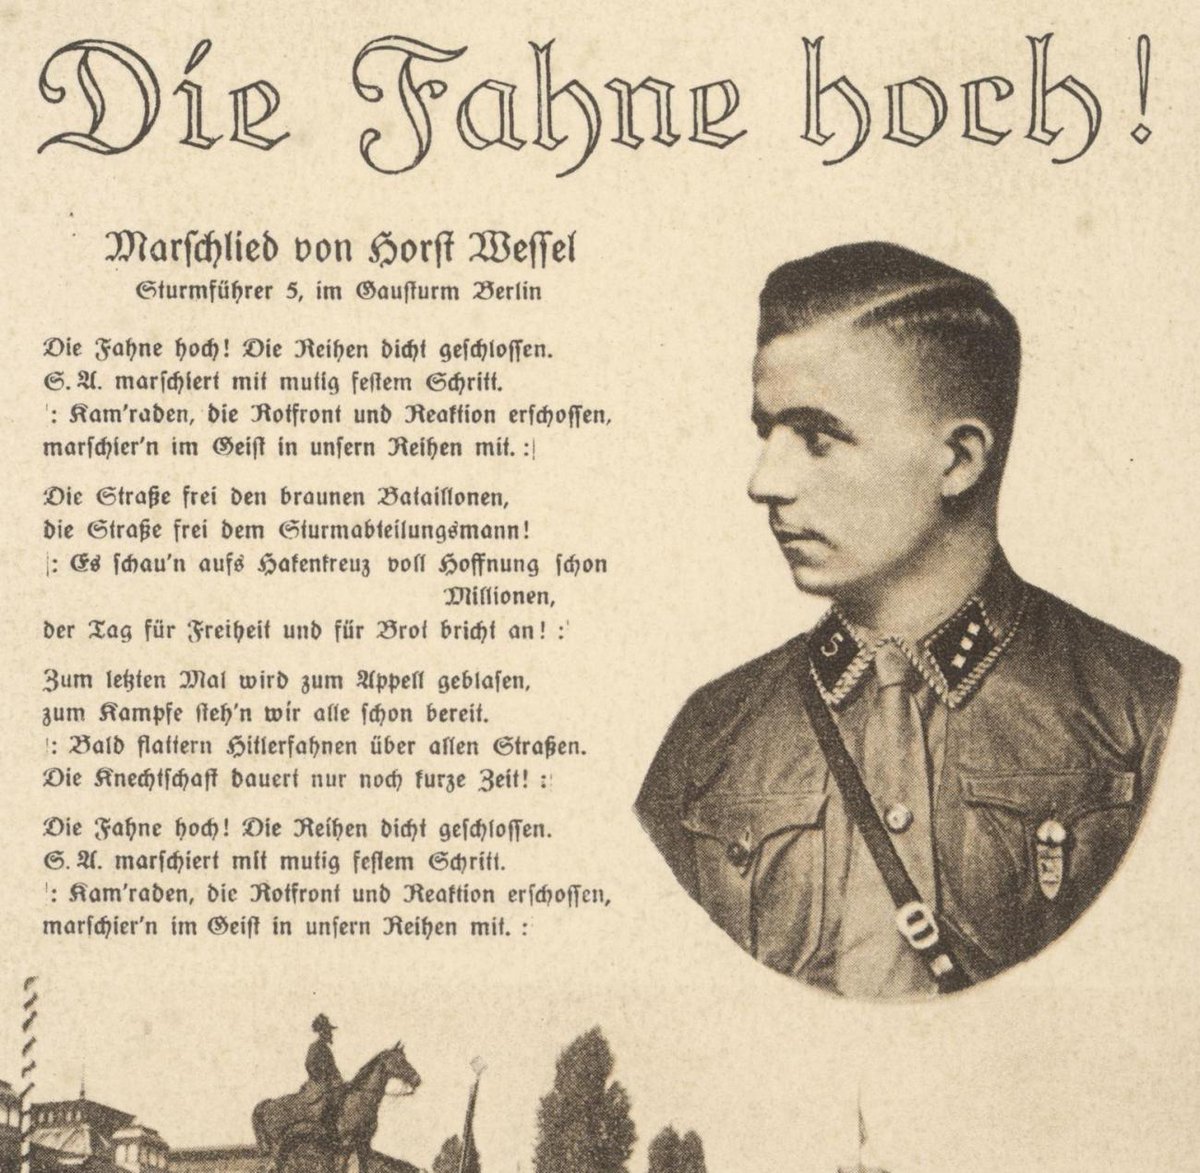 A marching song - 'Die Fahne Hoch' - was named 'Horst-Wessel-Lied', or 'The Horst Wessel Song' and sung by SA units, as well as the Hitler Jugend and BDM (Bund Deutscher Madel) throughout the time of Nazi rule. /9